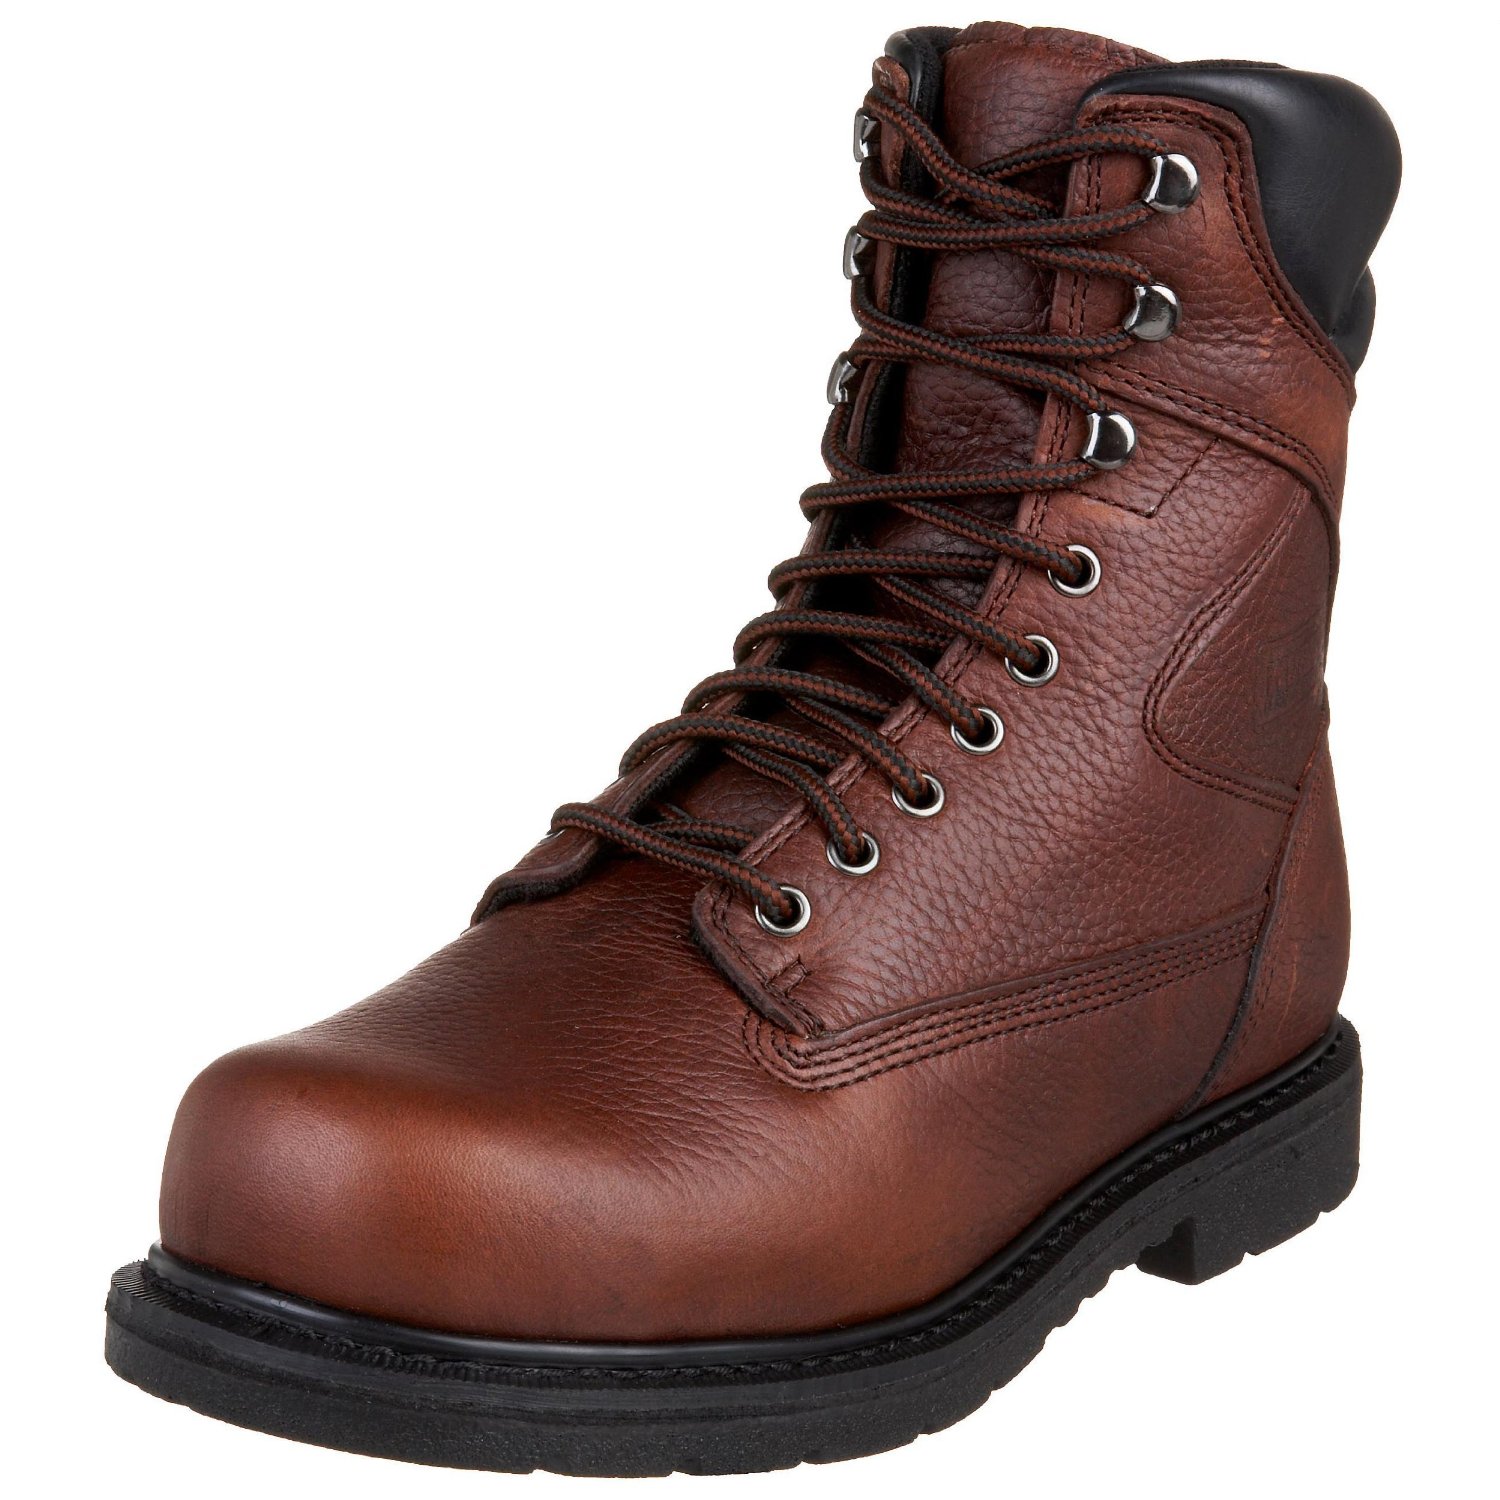 Red wing Worx By Red Wing Shoes Mens Oblique Toe Steel Toe 8 Work Boot